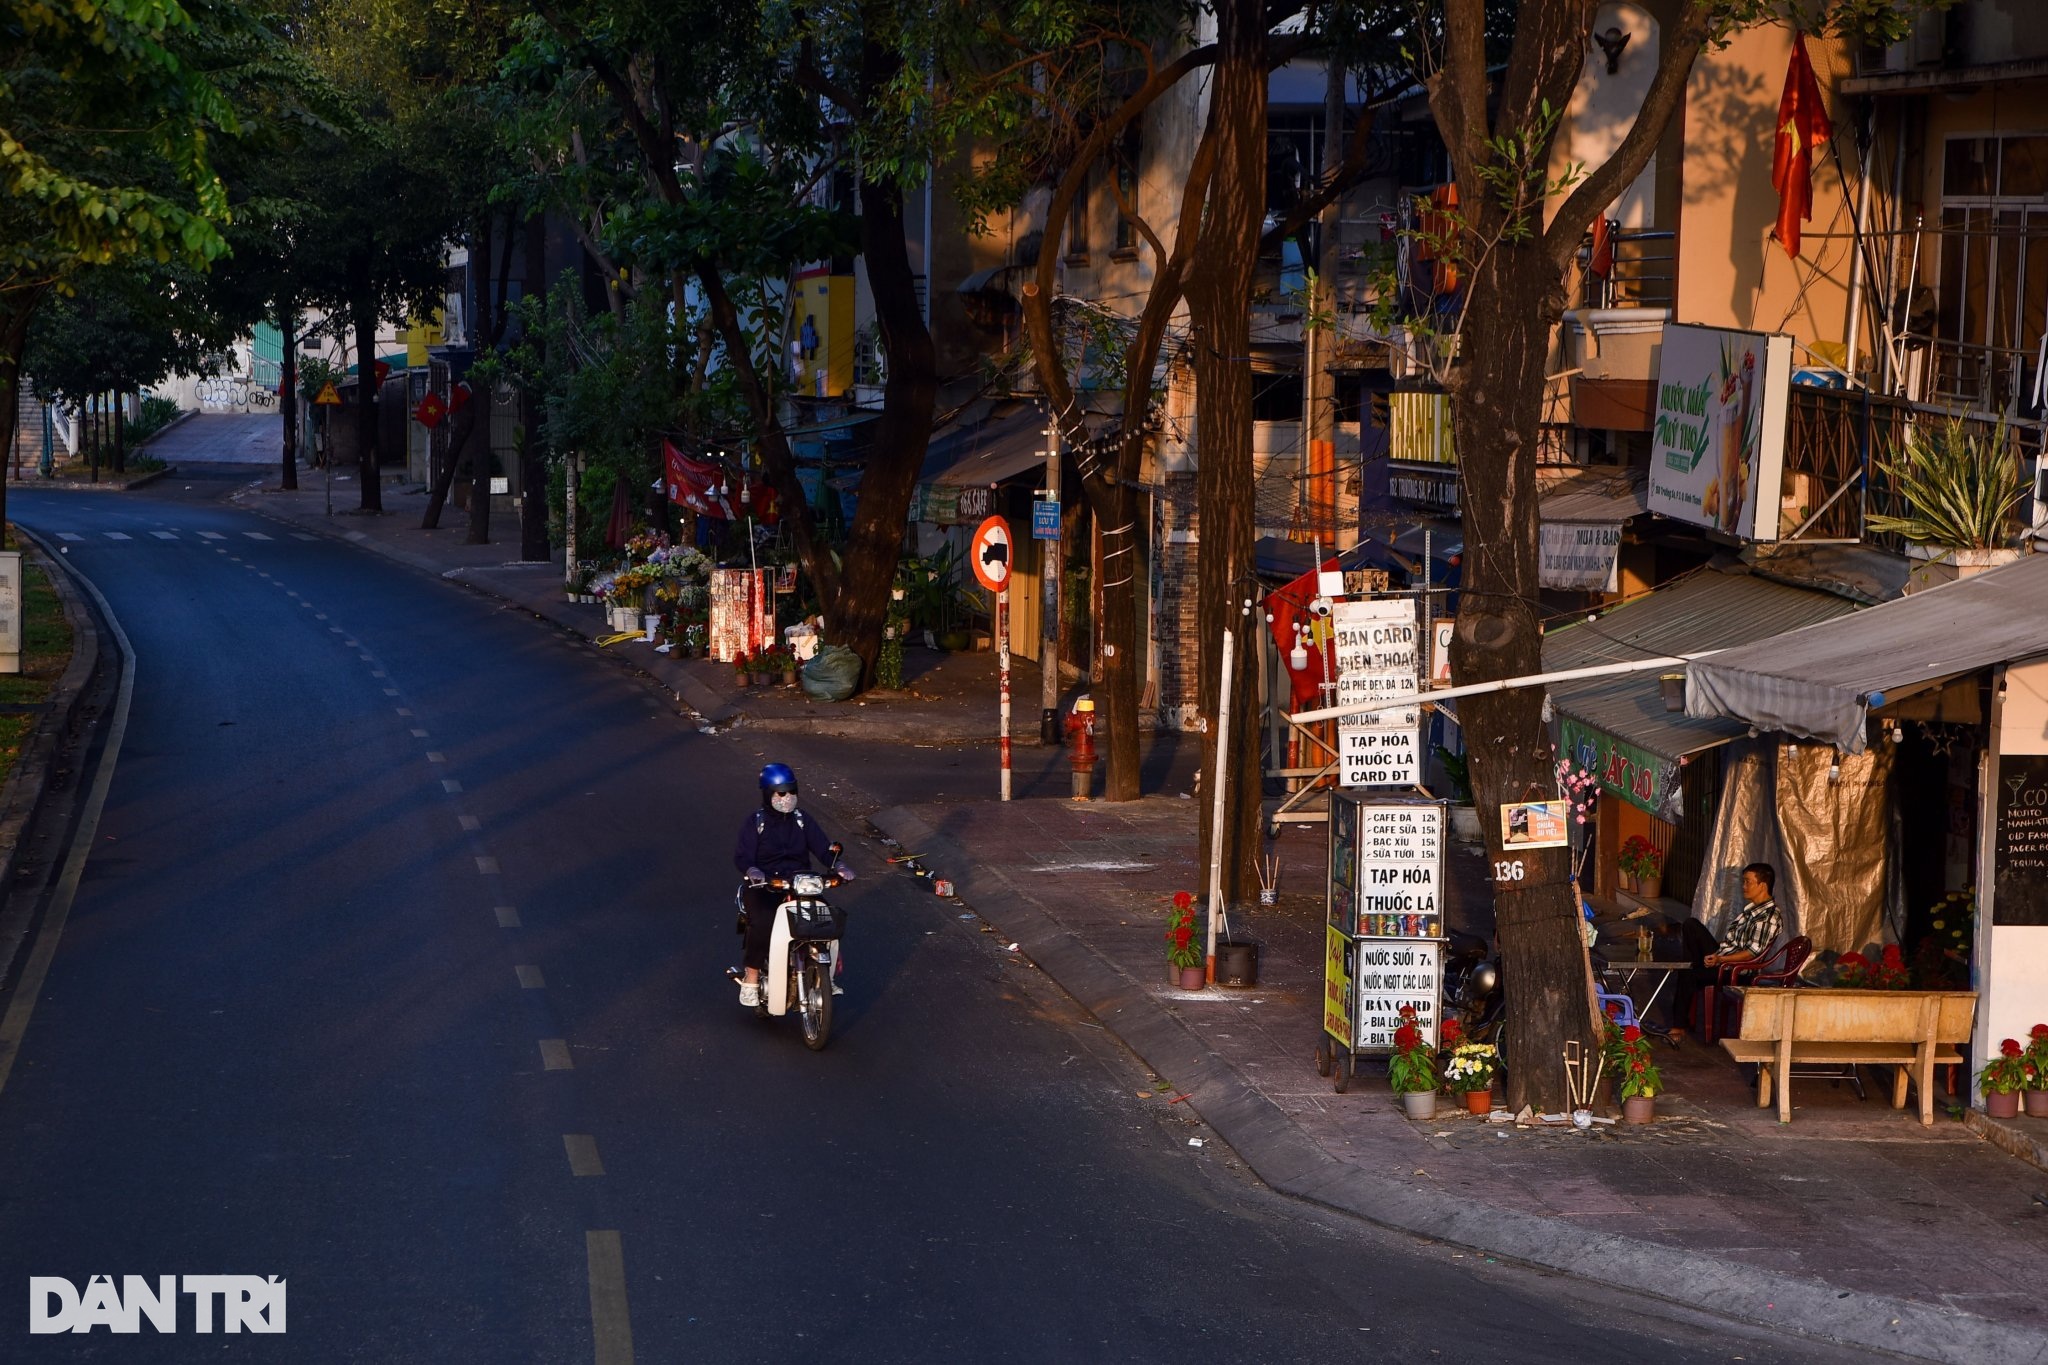 Ho Chi Minh City is peaceful and poetic on New Year's Day - November 11